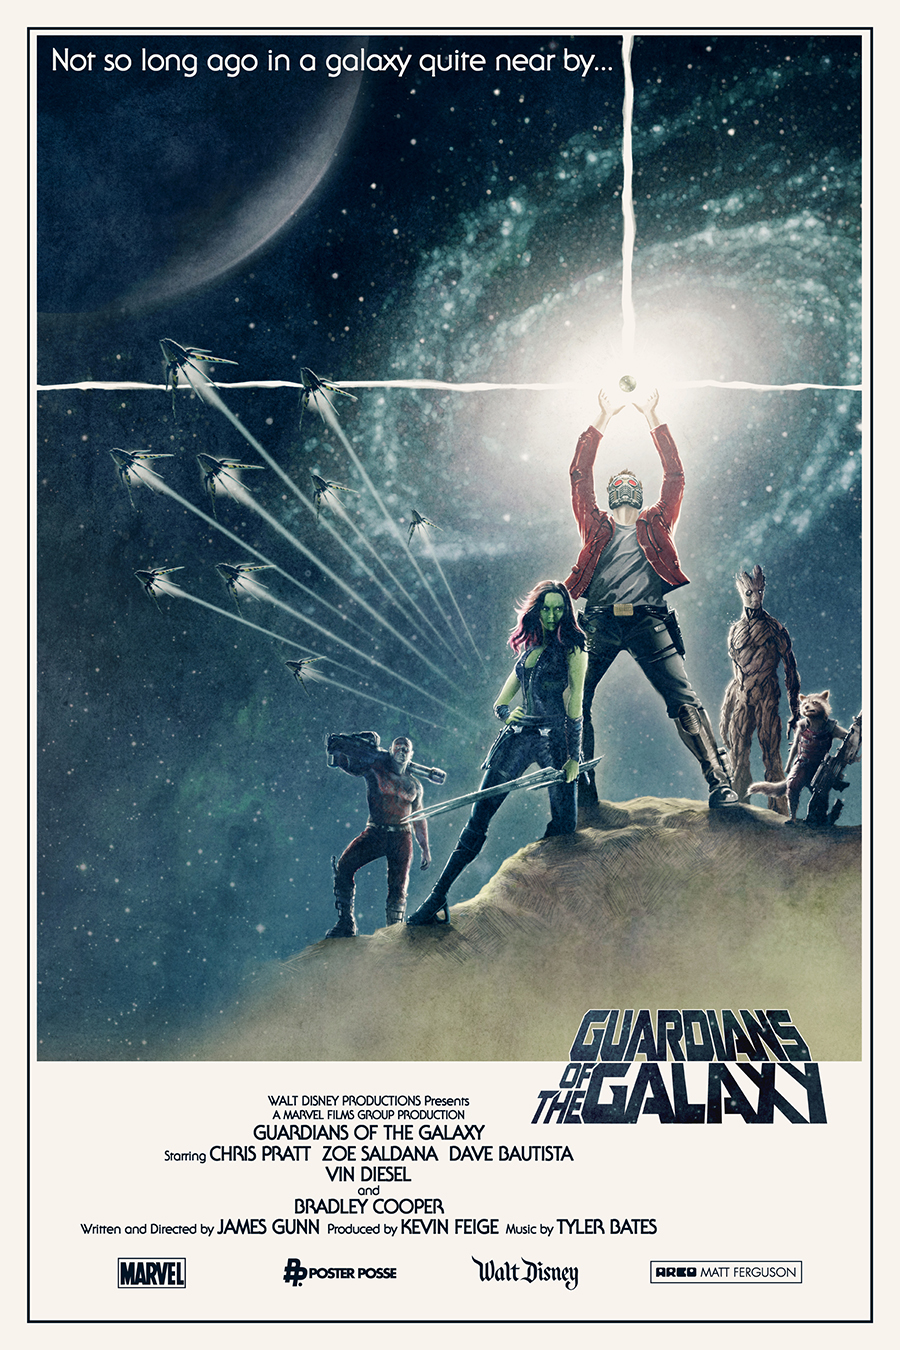 Marvel Offers Fans Officially Licensed “Guardians of the Galaxy” Prints ...